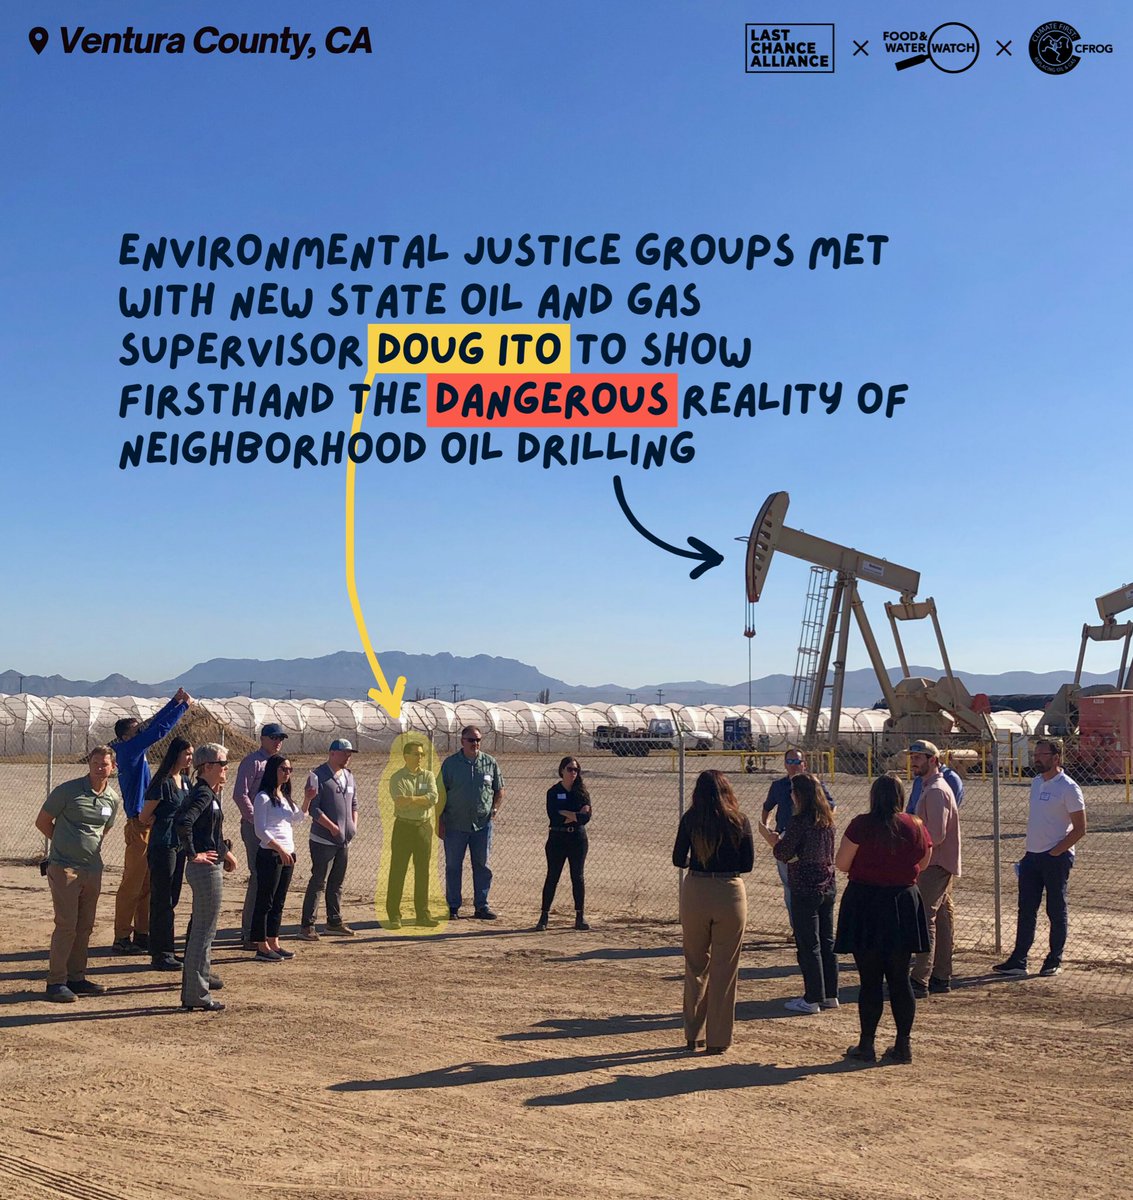 New CalGEM supervisor Doug Ito and some of his team accepted invitations from EJ advocates and community members in LA, Ventura and Kern county to join them on “Toxic Tours” to witness firsthand the reality of neighborhood oil and gas drilling. 

#NoDrillingWhereWereLiving